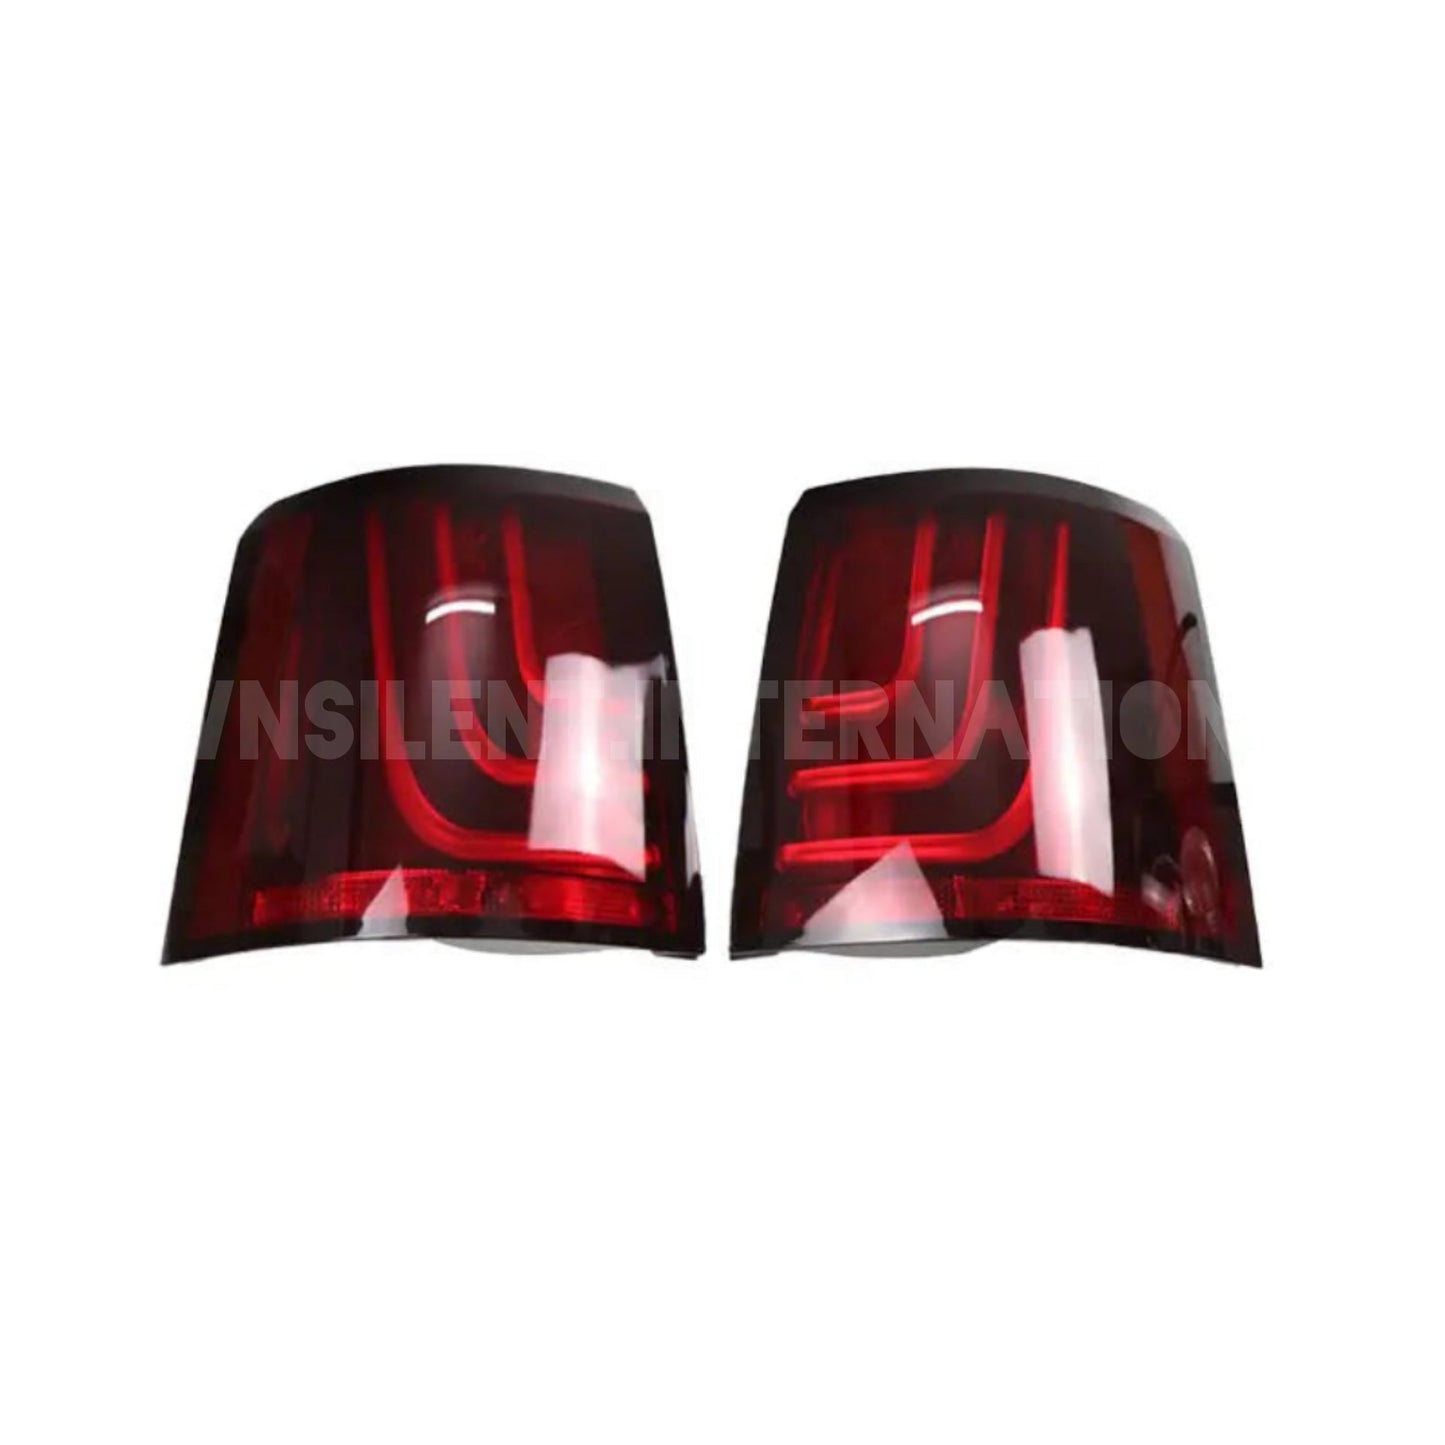 Rear taillight assembly for Range Rover Sport L320